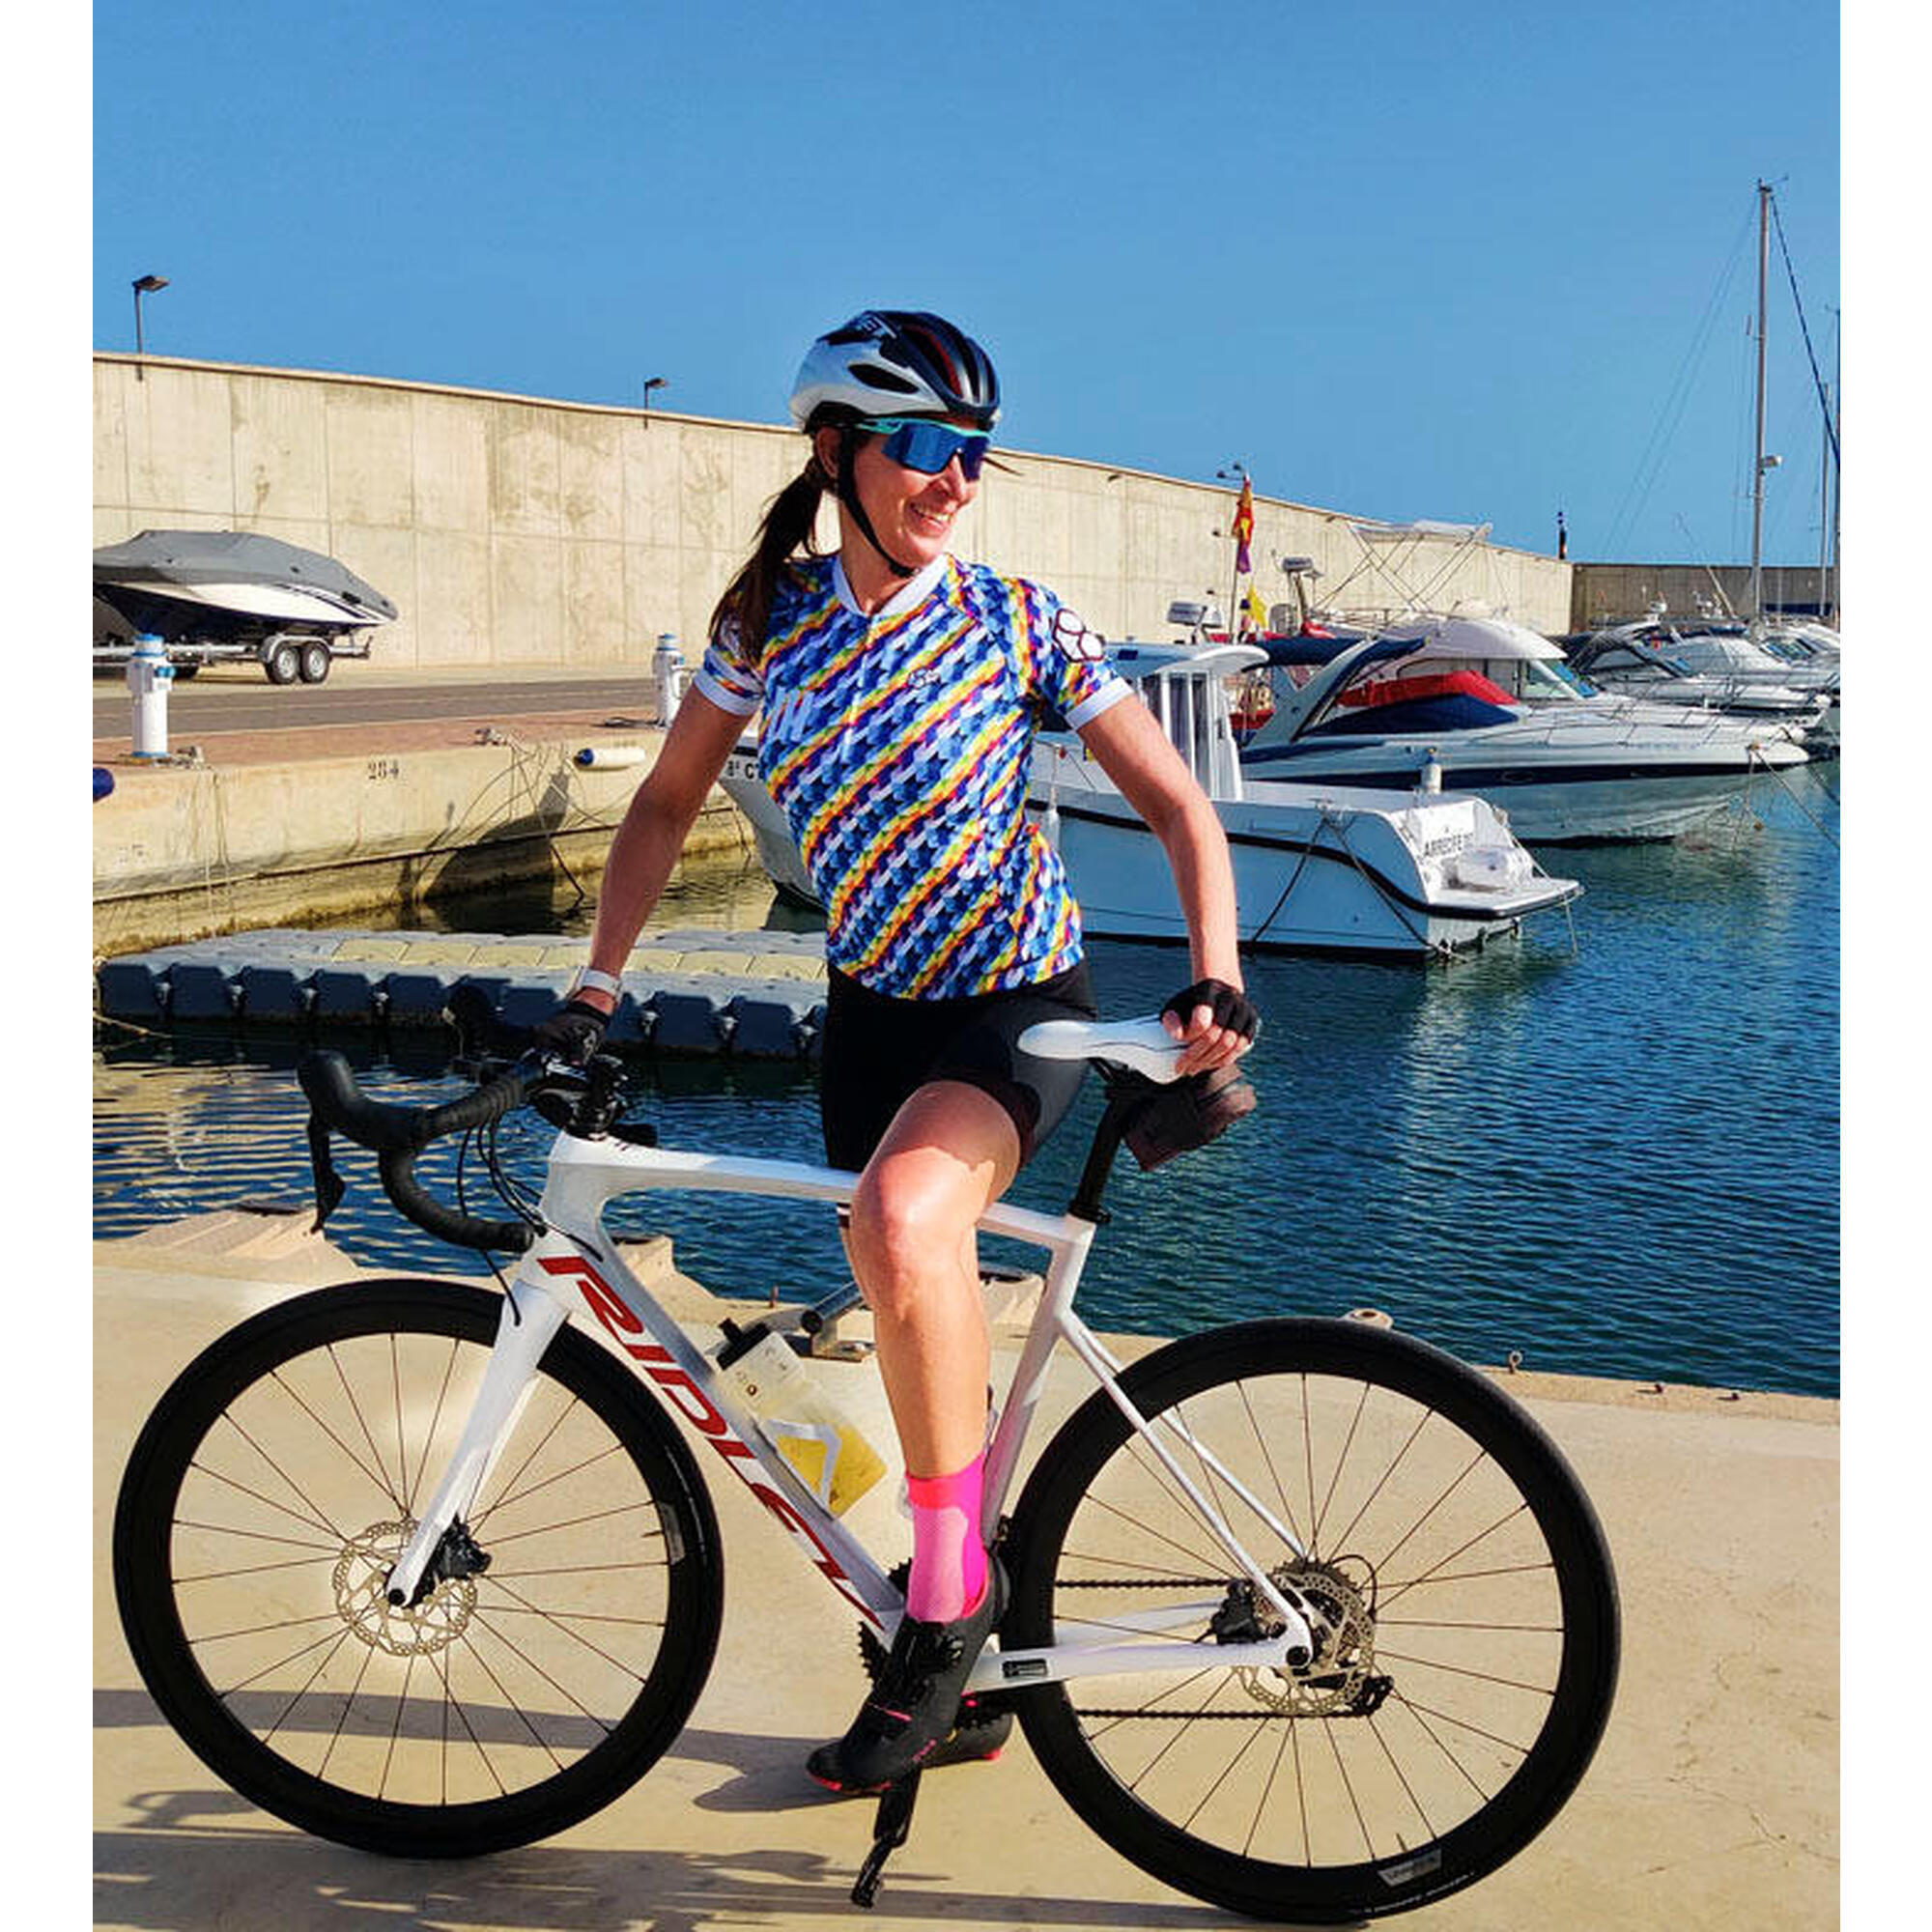 Maillot cycliste manches courtes pour femme multicolore 8andCounting